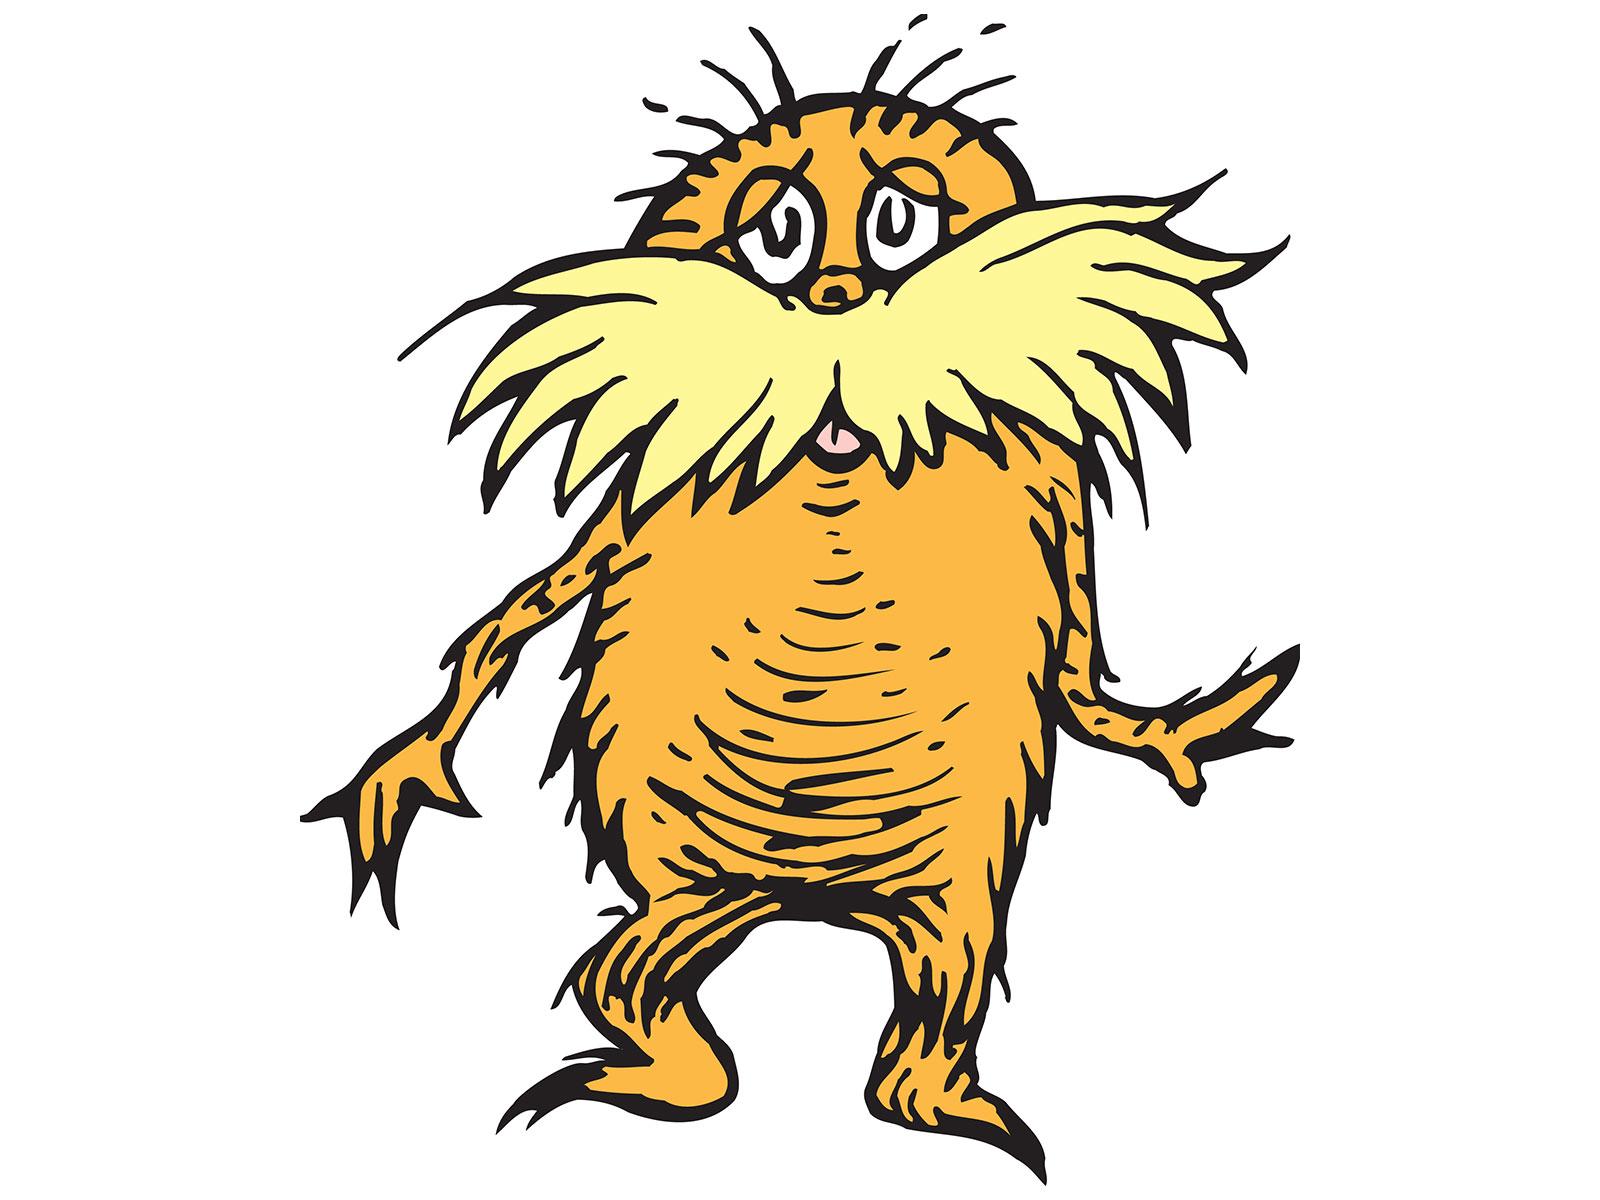 New Research Suggests Dr. Seuss Modeled The Lorax On This Real Life